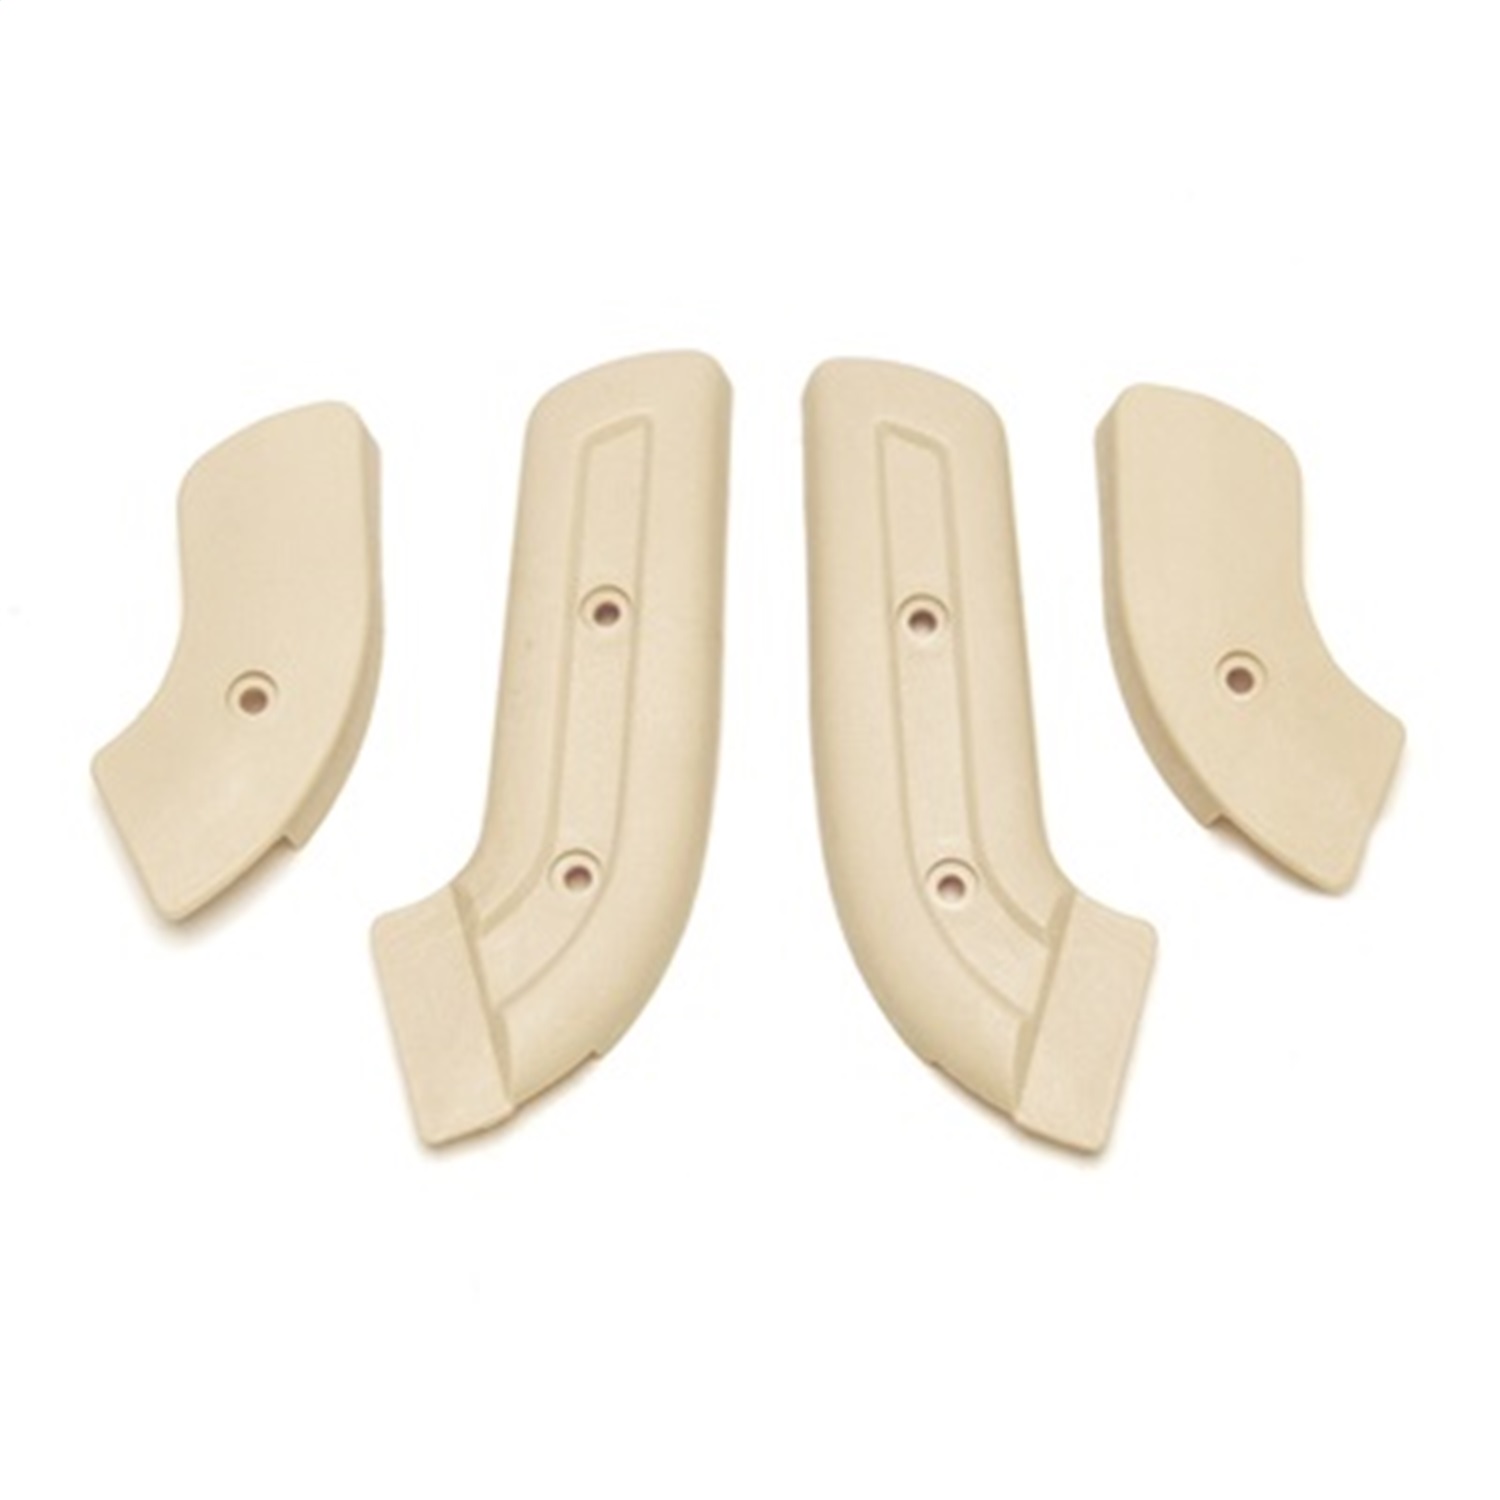 SEAT HINGE COVERS NEUTRAL